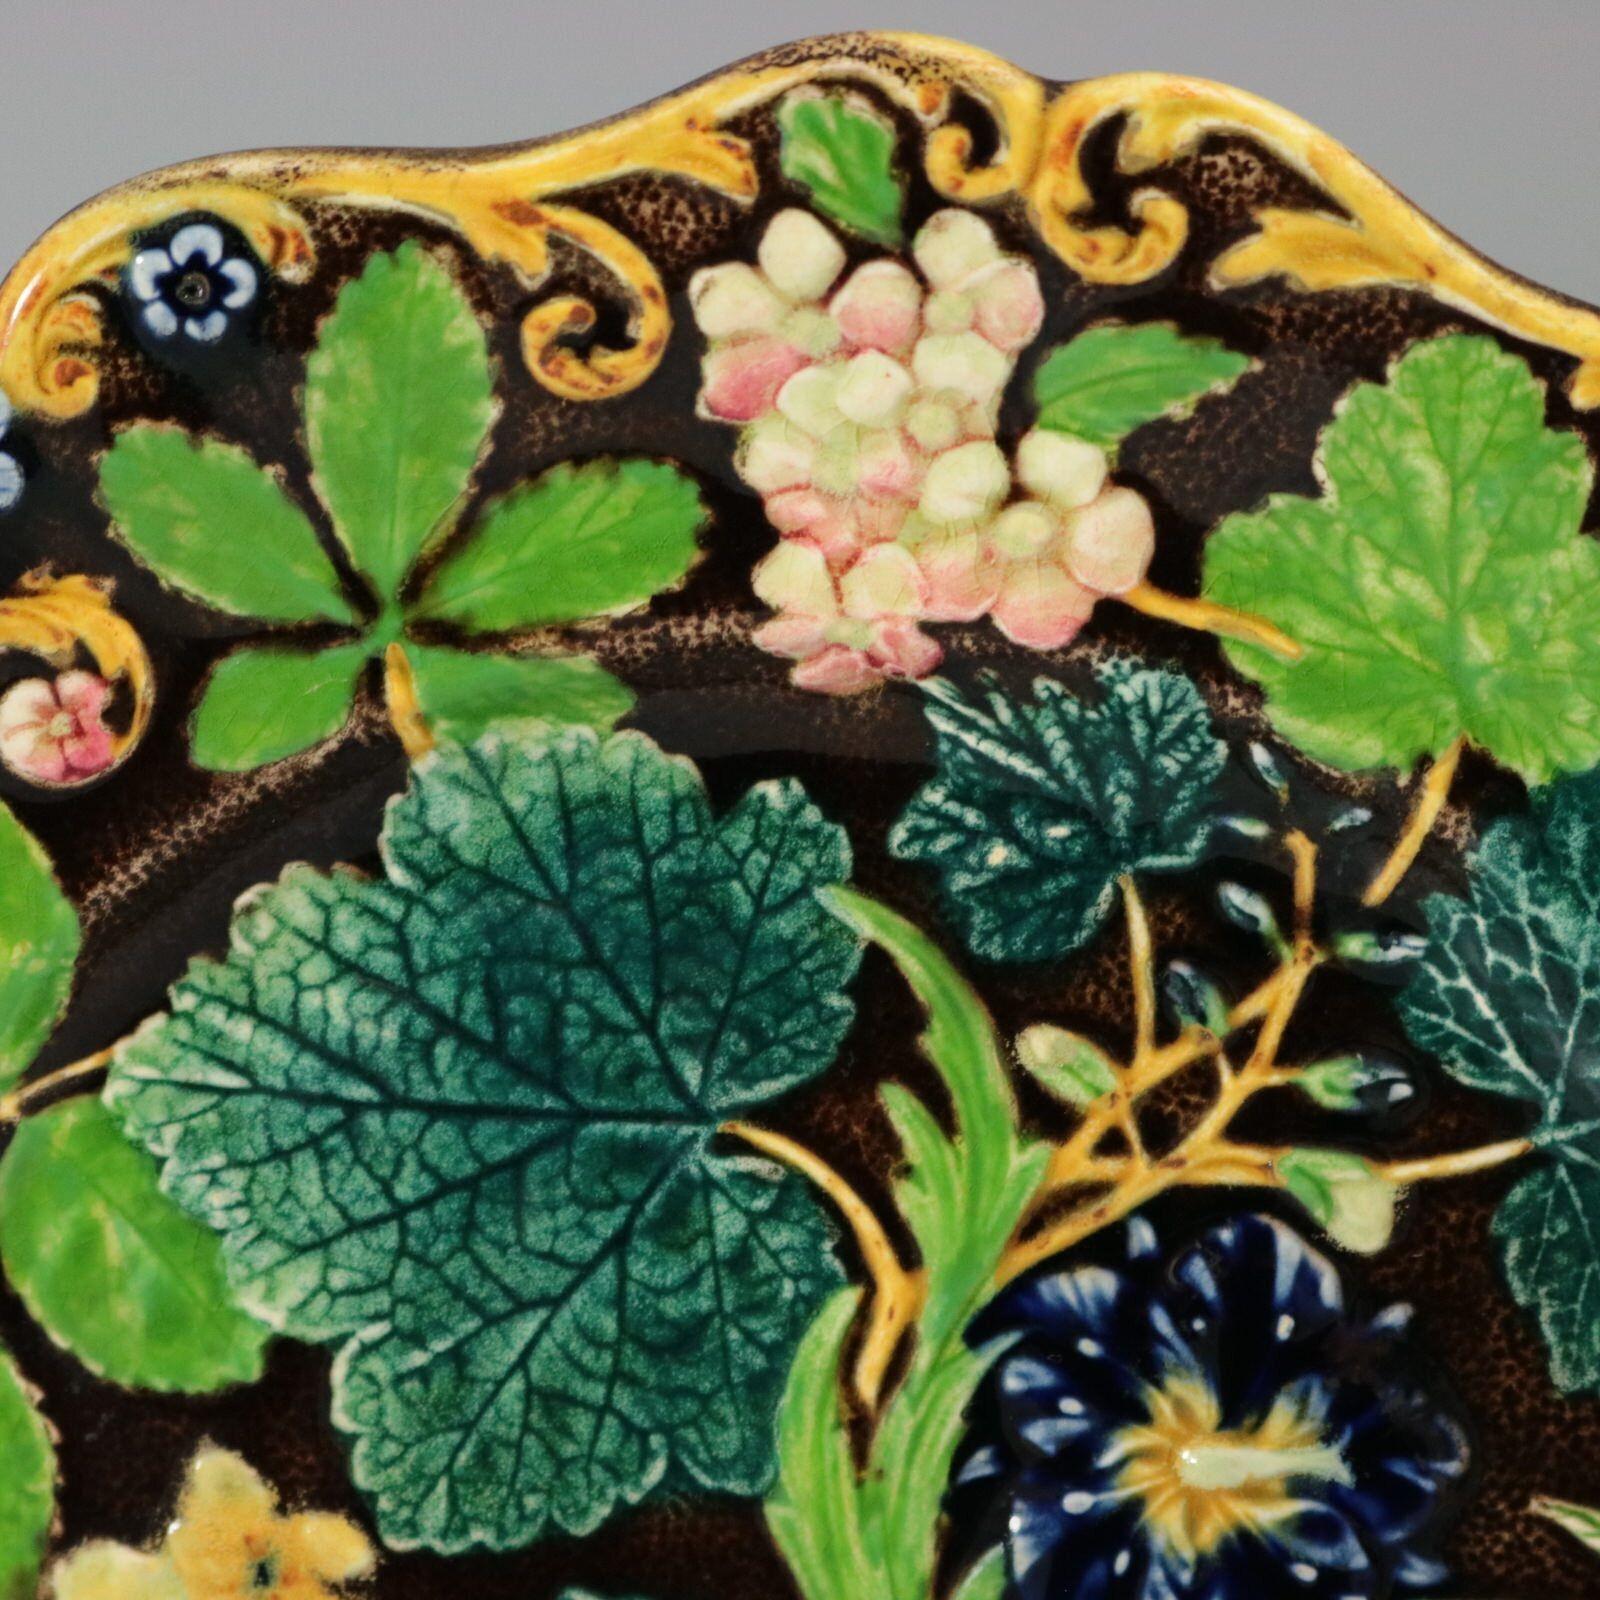 Alcock Majolica which features a stunning array of flowers and leaves. Colouration: brown, green, blue, are predominant.